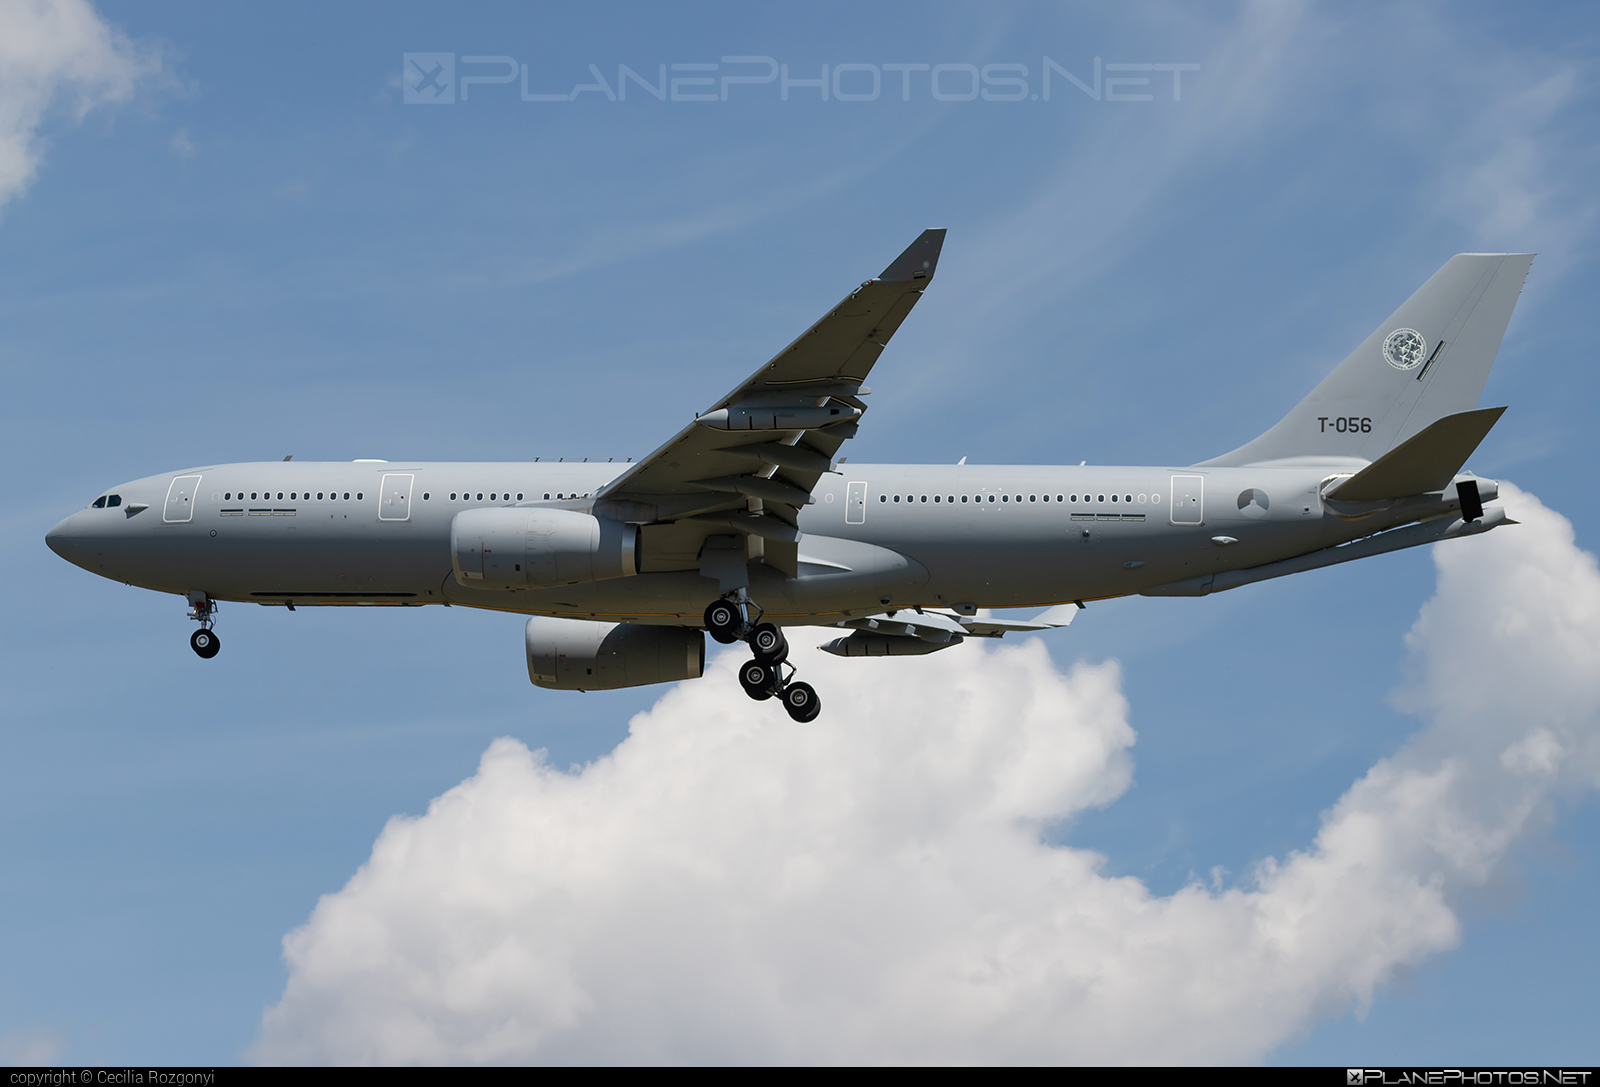 Airbus Military A330-243MRTT - T-056 operated by Koninklijke Luchtmacht (Royal Netherlands Air Force) #a330 #a330mrtt #airbus330 #airbusmilitary #koninklijkeluchtmacht #royalnetherlandsairforce